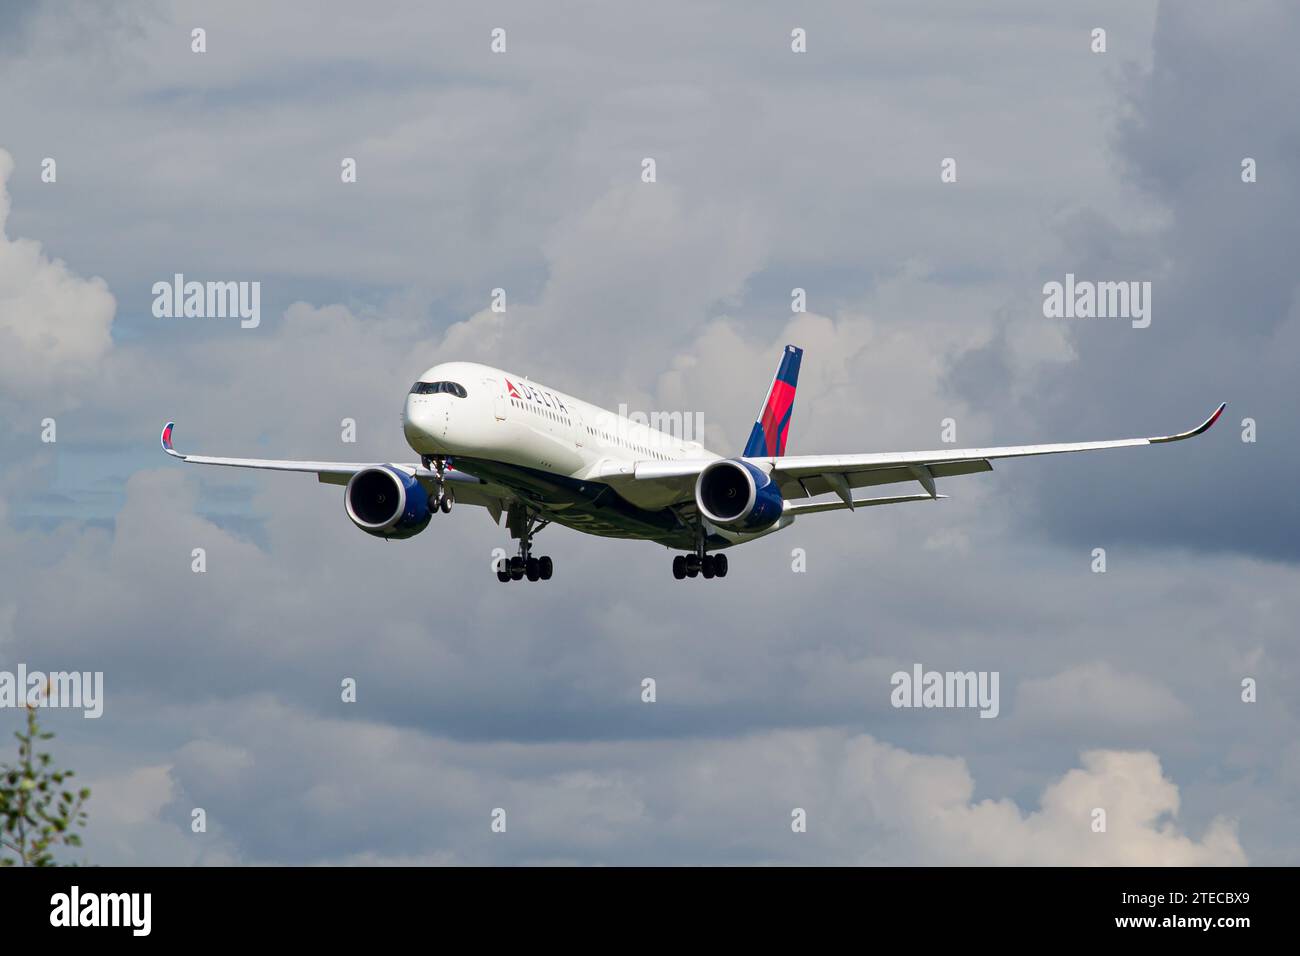 Delta Air Lines Airbus A350-900 aircraft landing in Lviv. This was the first visit of the A350 to Lviv Airport. High-quality photo Stock Photo